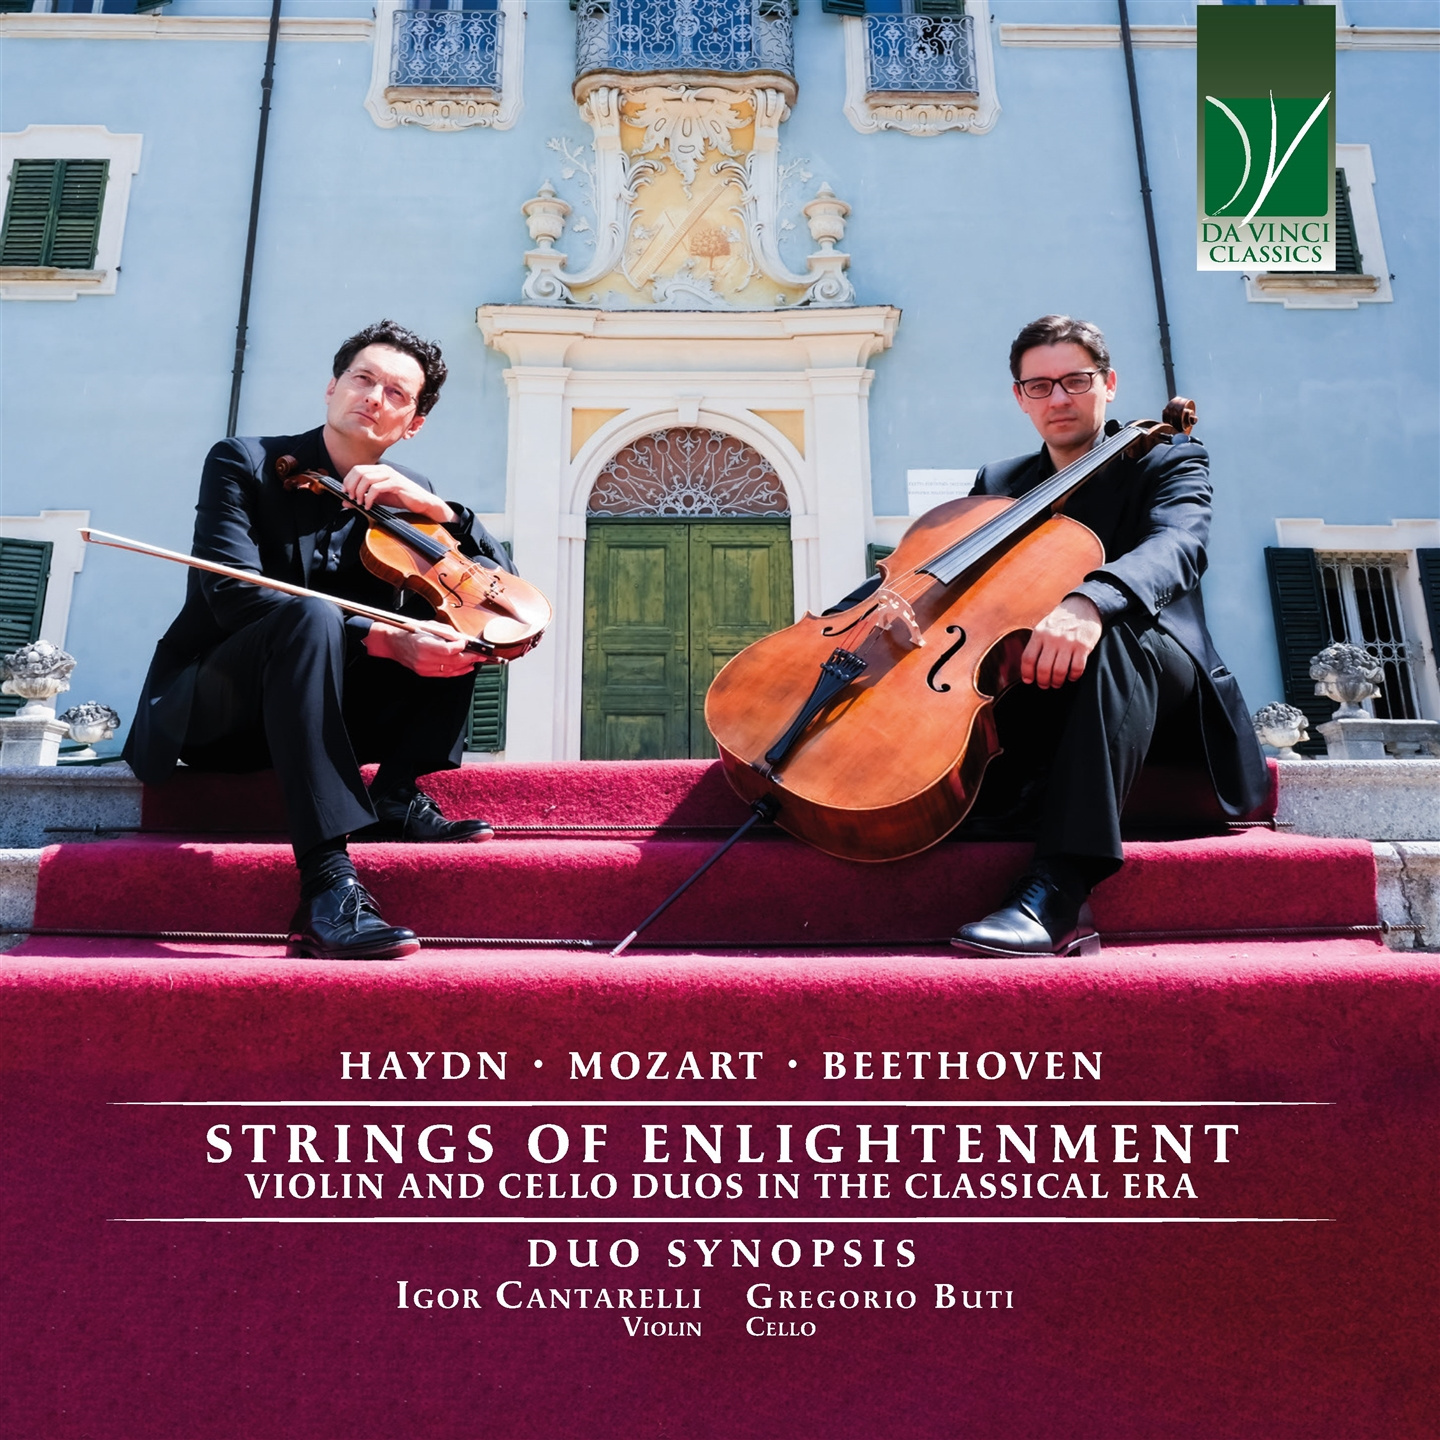 STRINGS OF ENLIGHTENMENT: VIOLIN AND CELLO DUOS IN THE CLASSICAL ERA